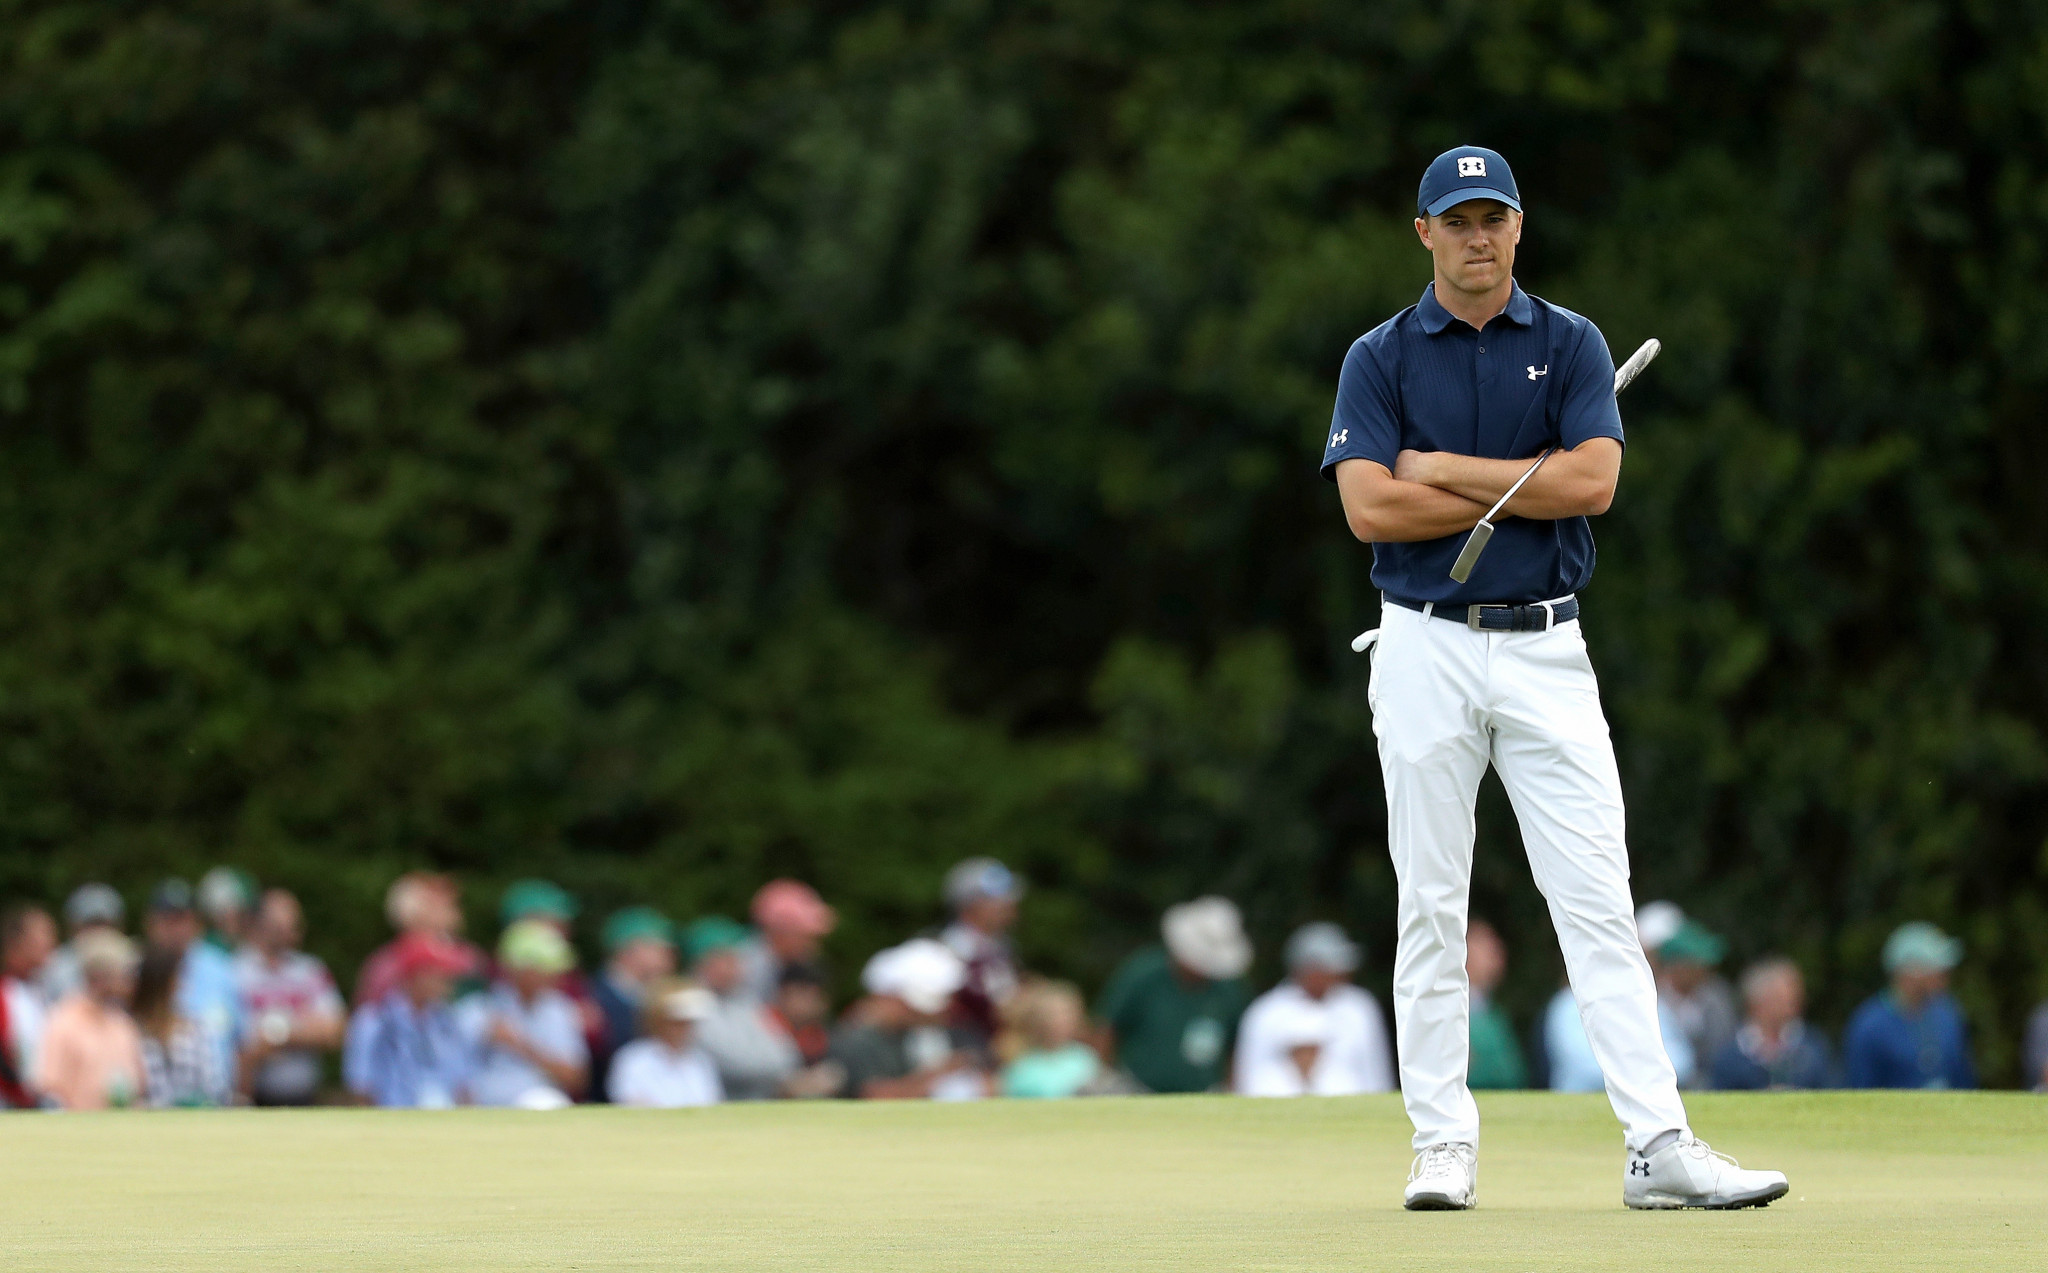 Jordan Spieth is the leader after the first round ©Getty Images